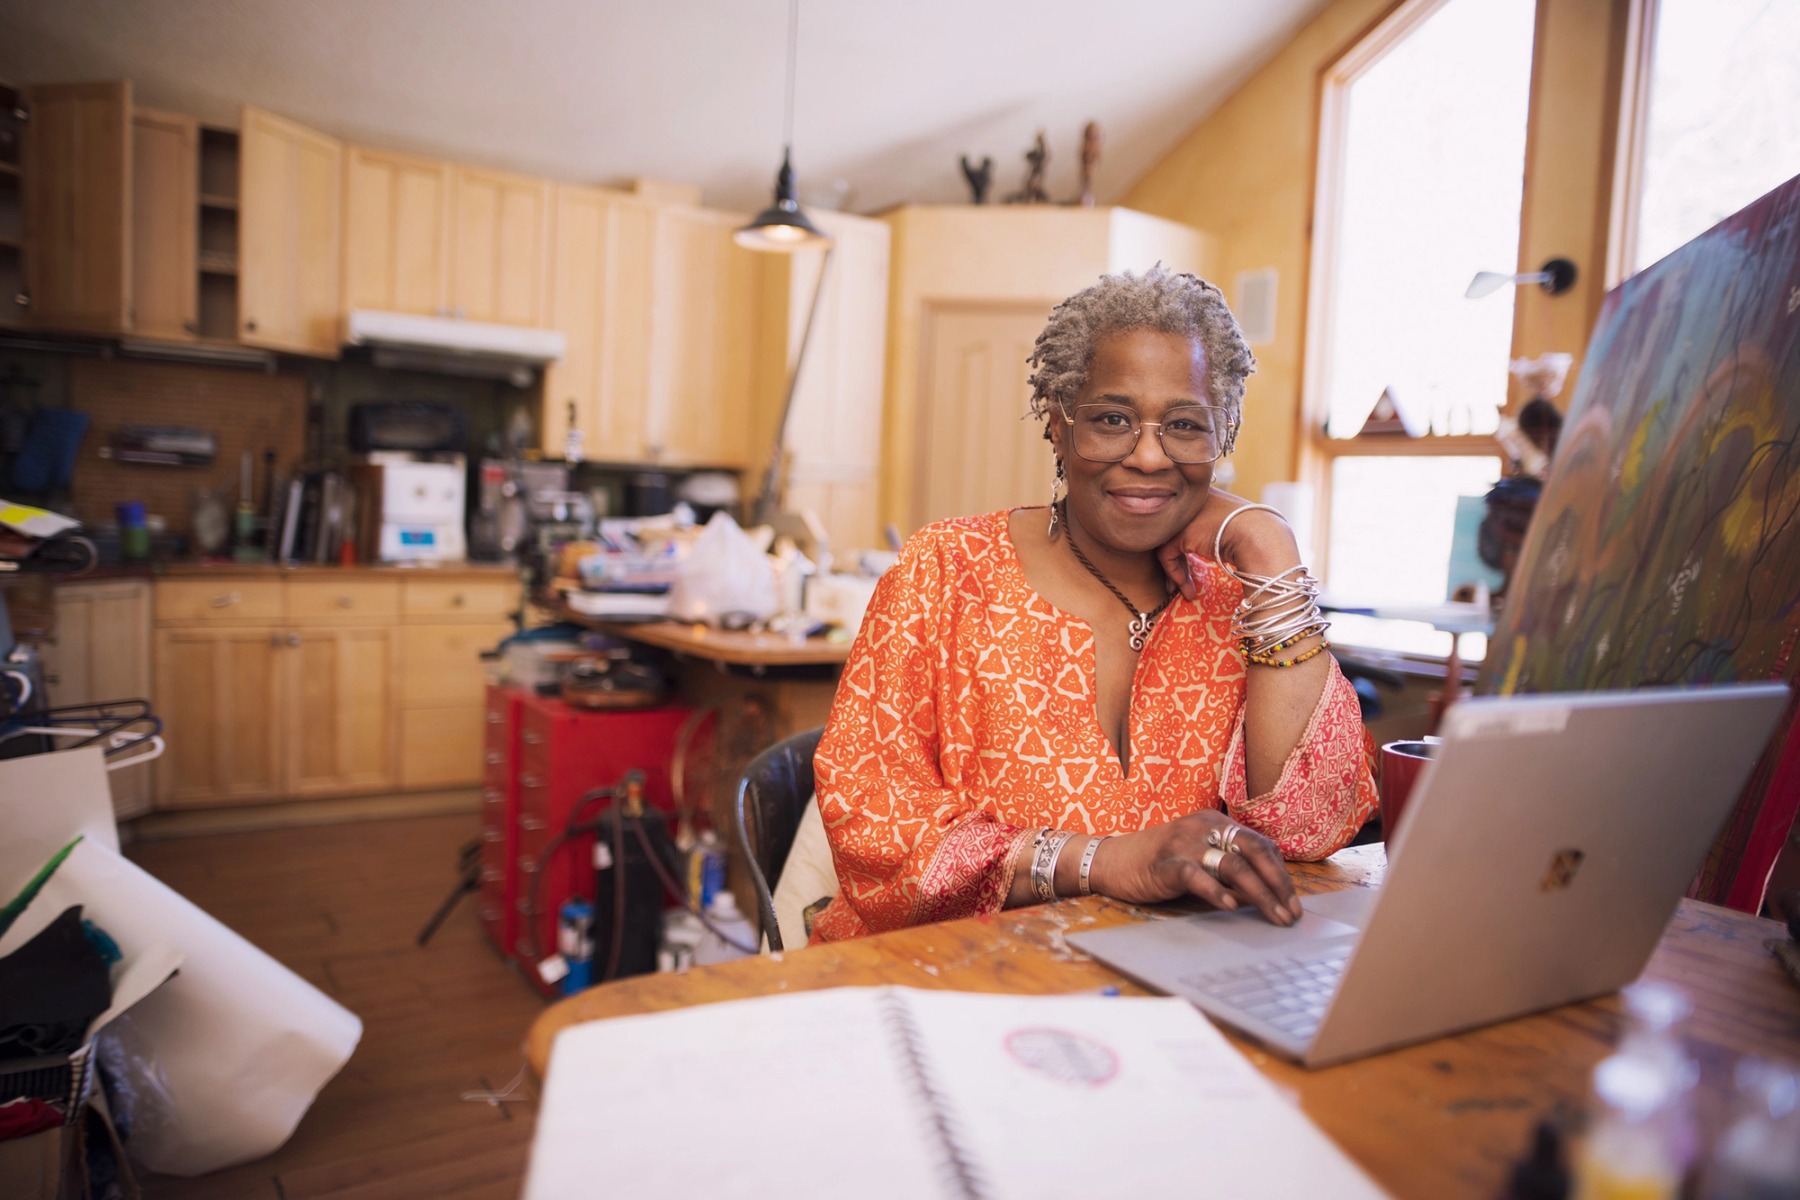 A black woman with grey hair and glasses sits at a table in her art studio, smiling at the camera.